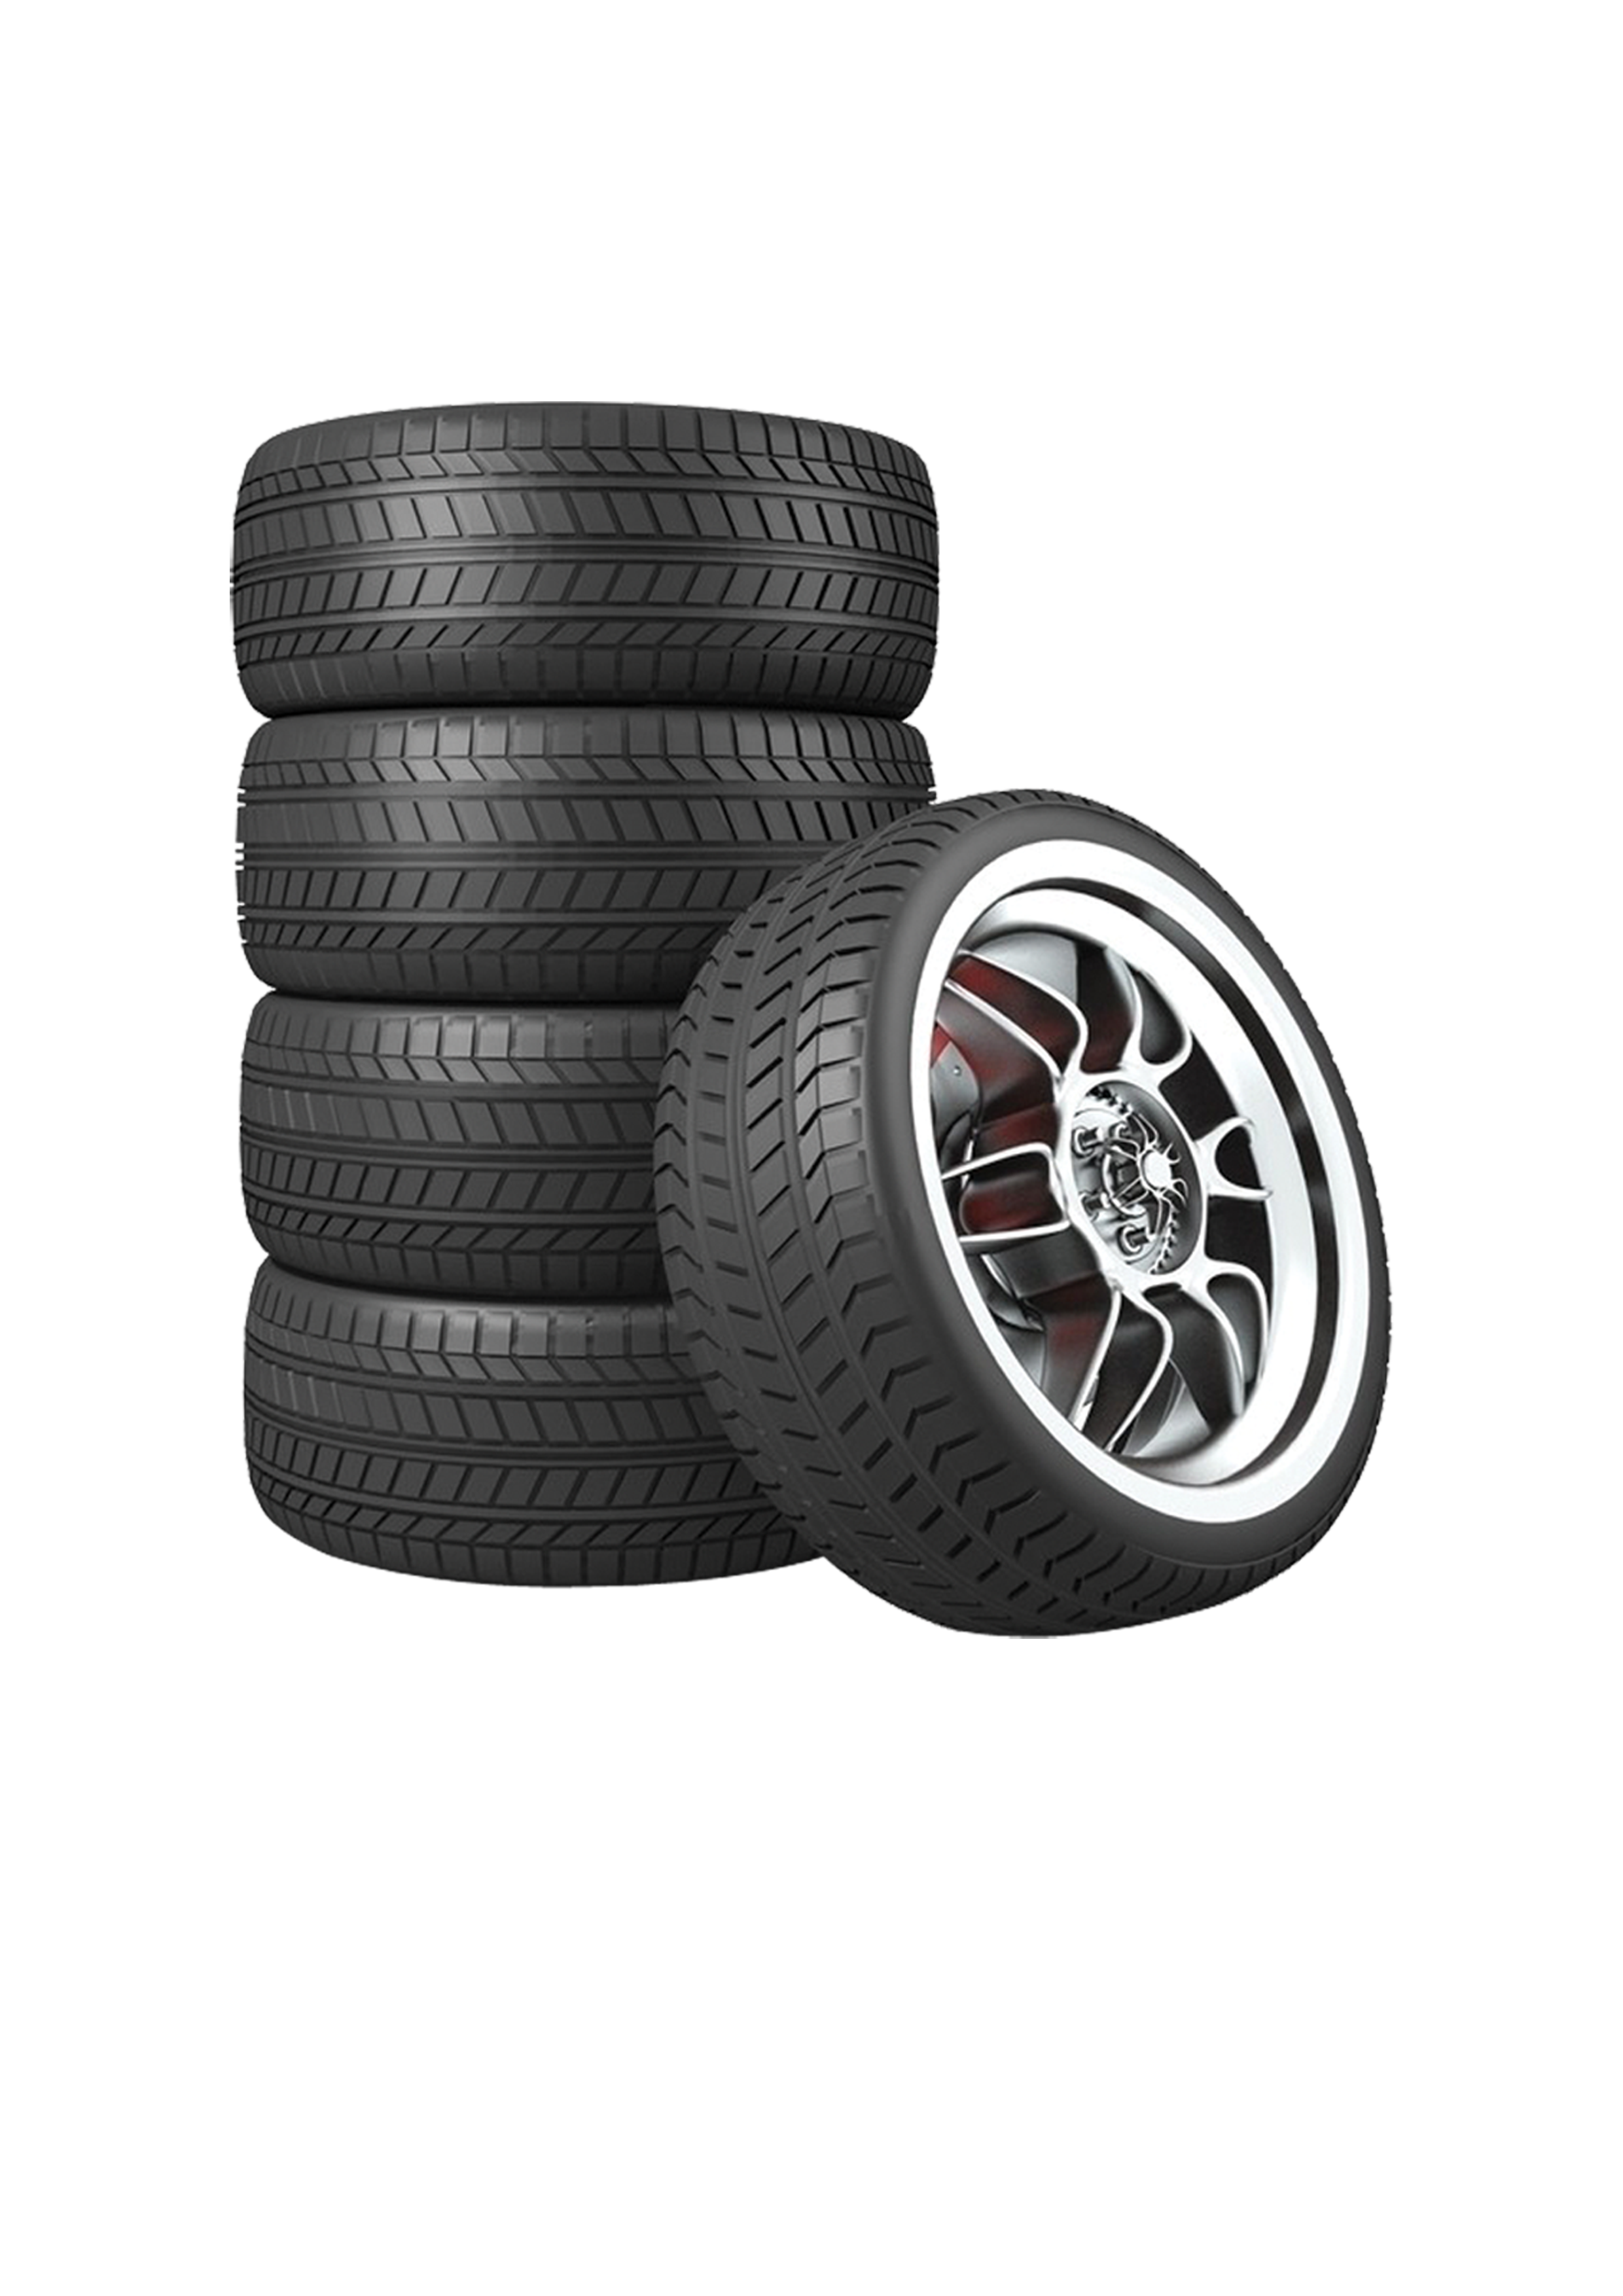 Wheel Car Tires Spare Tire Free Download Image Clipart